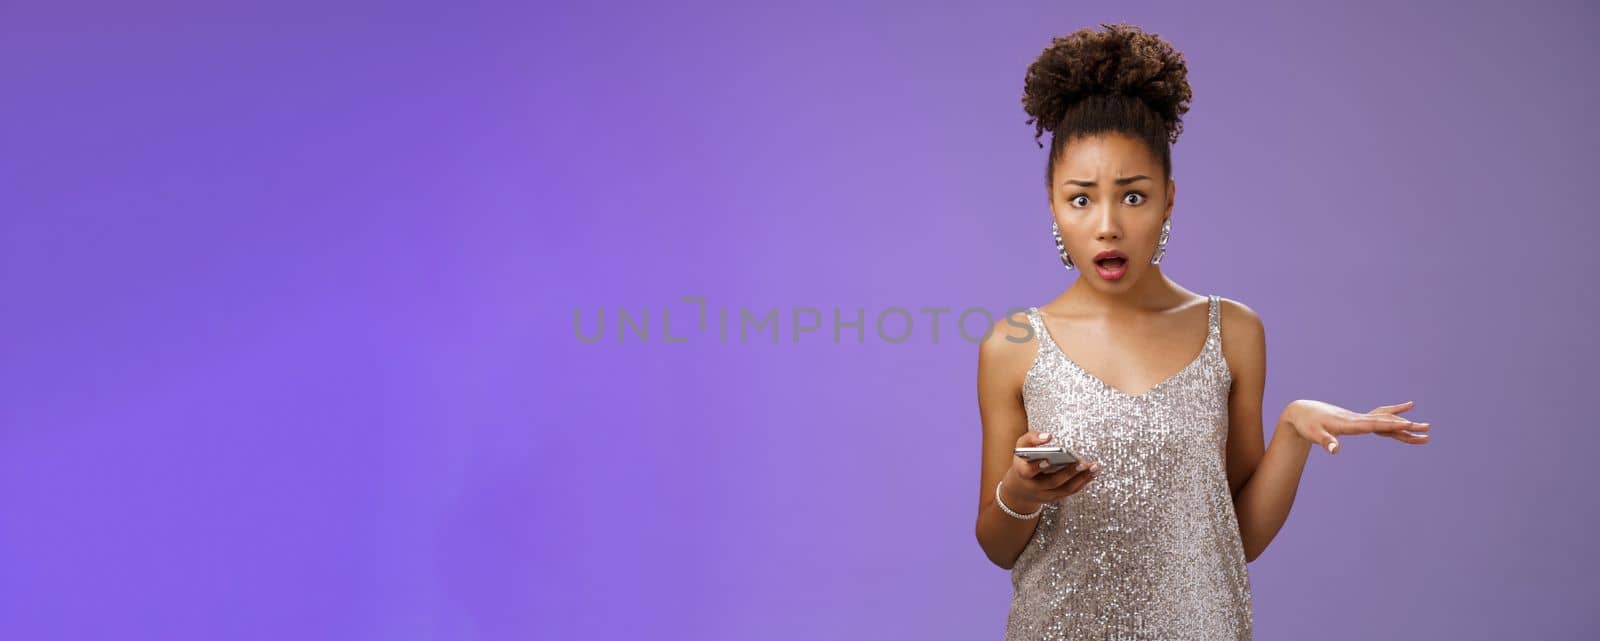 Concerned troubled arrogant silly glamour african american woman raise hand questioned holding smartphone insulted during phone call standing frustrated upset bothered blue background.